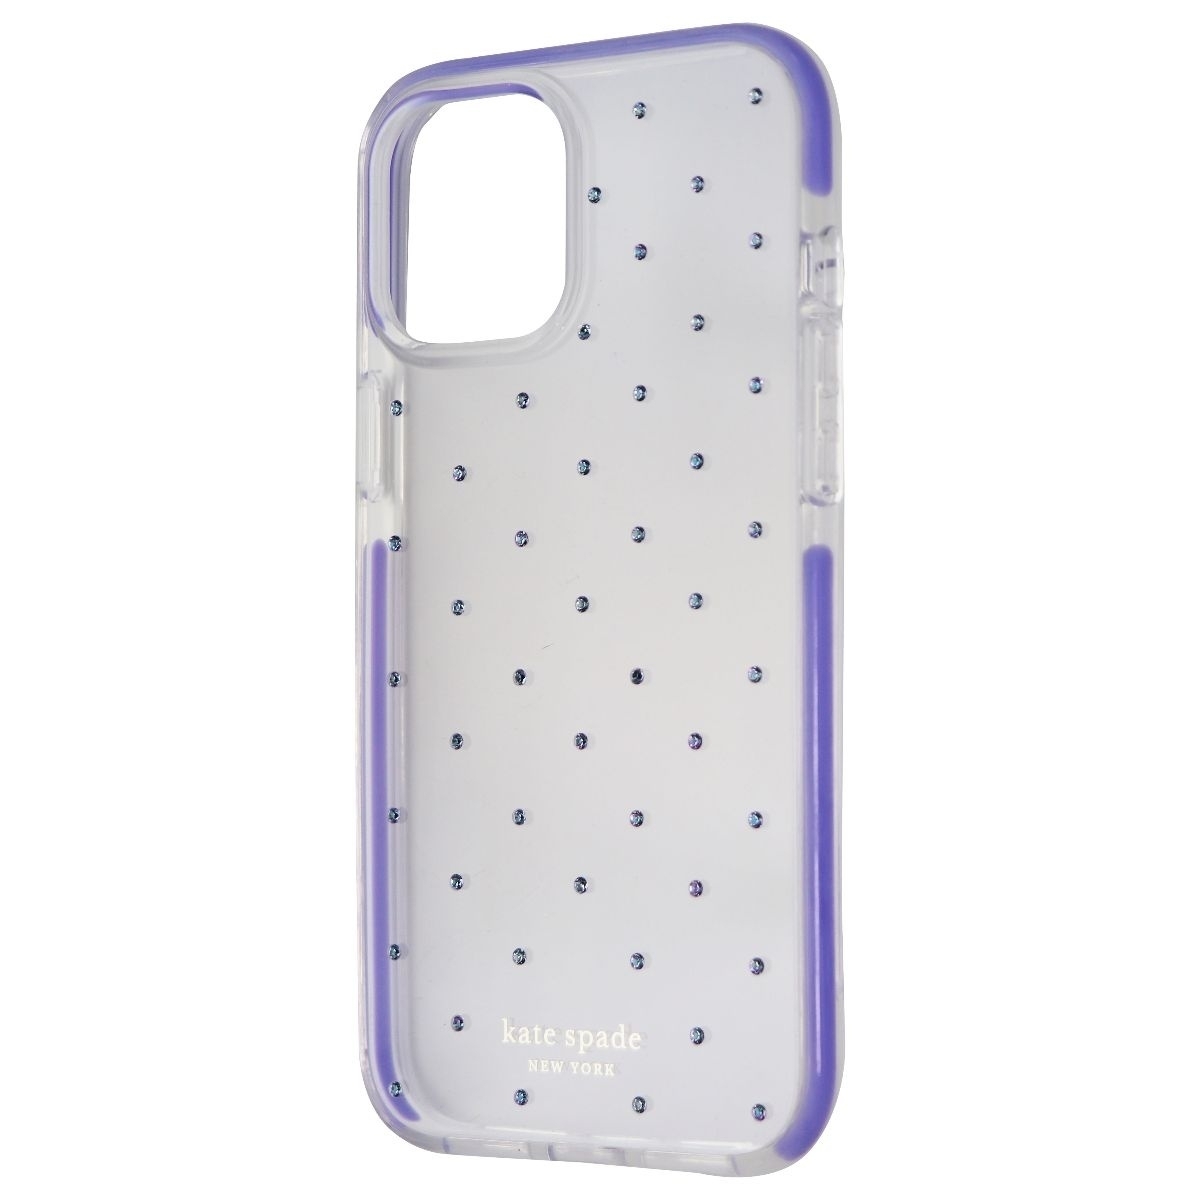 Kate Spade Hardshell Case For IPhone 12 Pro Max - Pin Dot Gems/Lilac Purple